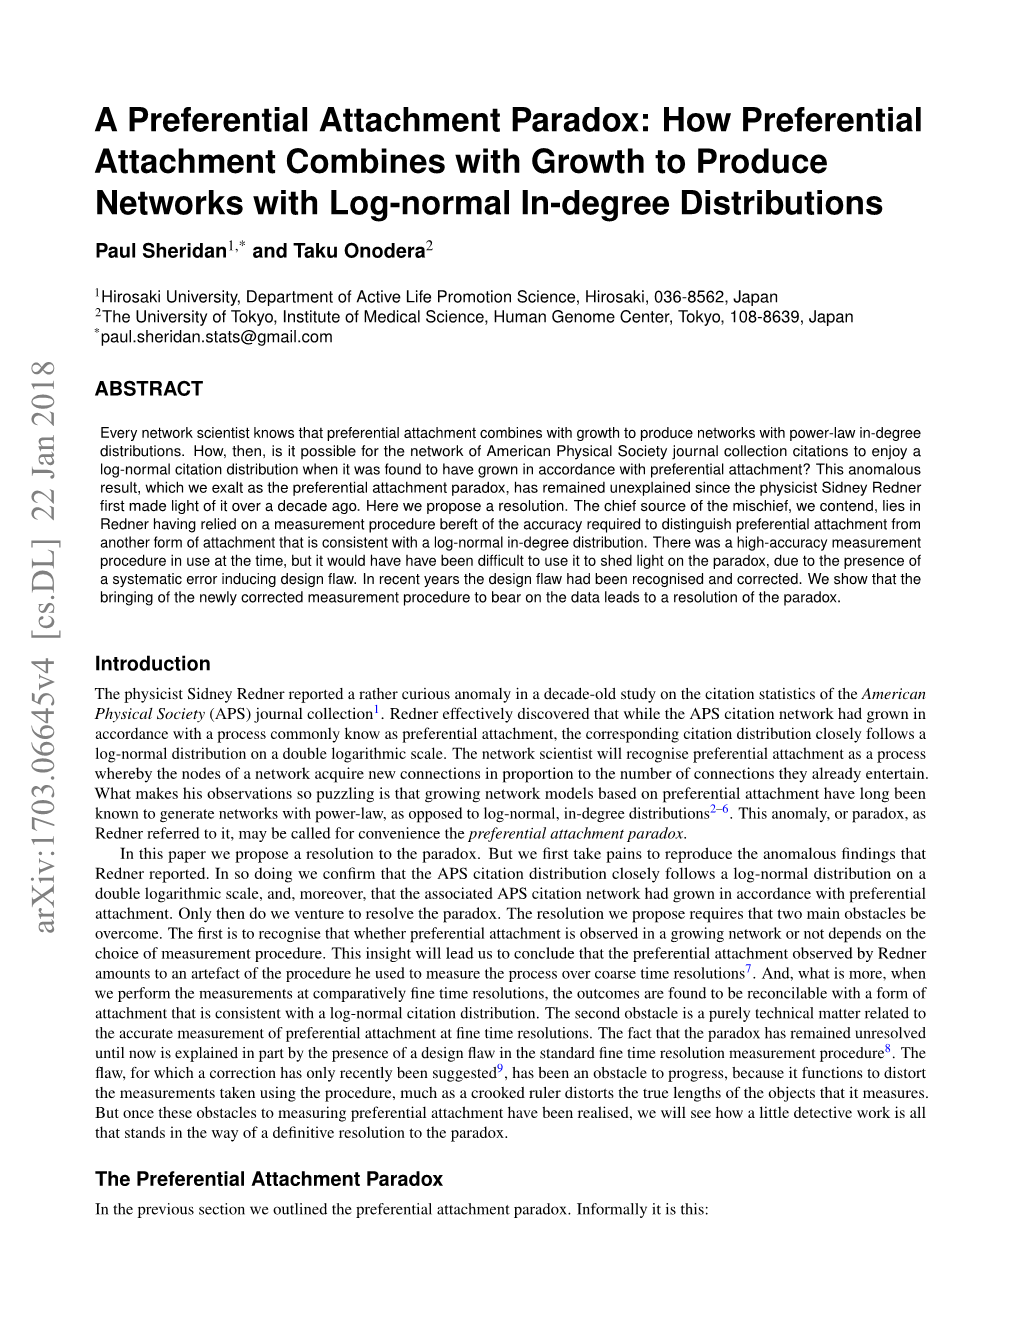 A Preferential Attachment Paradox: How Preferential Attachment Combines with Growth to Produce Networks with Log-Normal In-Degree Distributions